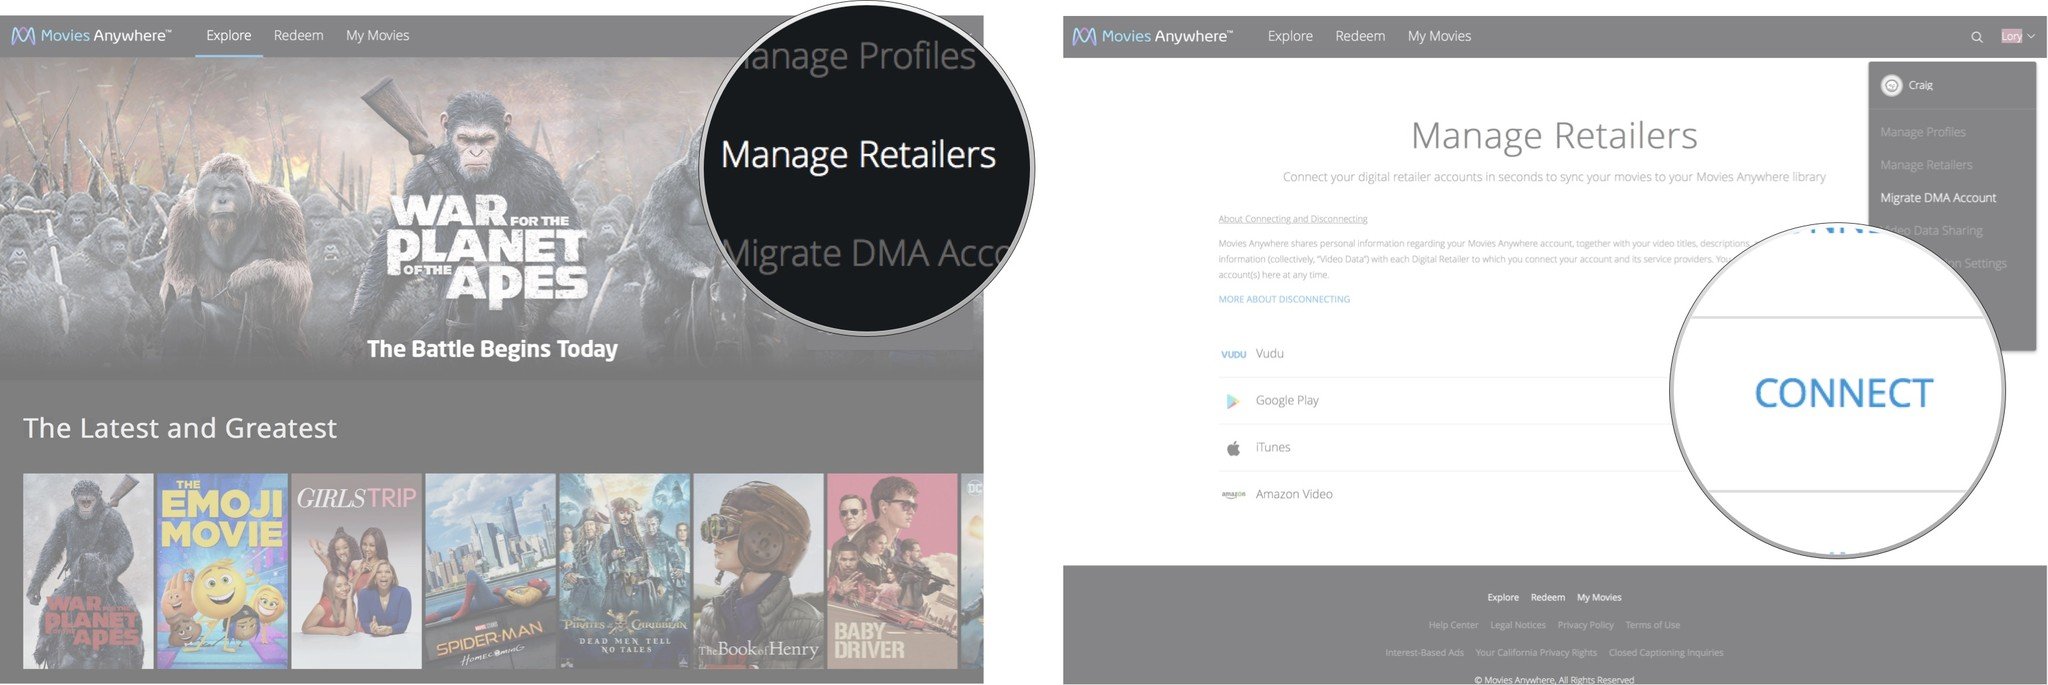 Click on Manage Retailers, then click on Connect to the accounts you want to add